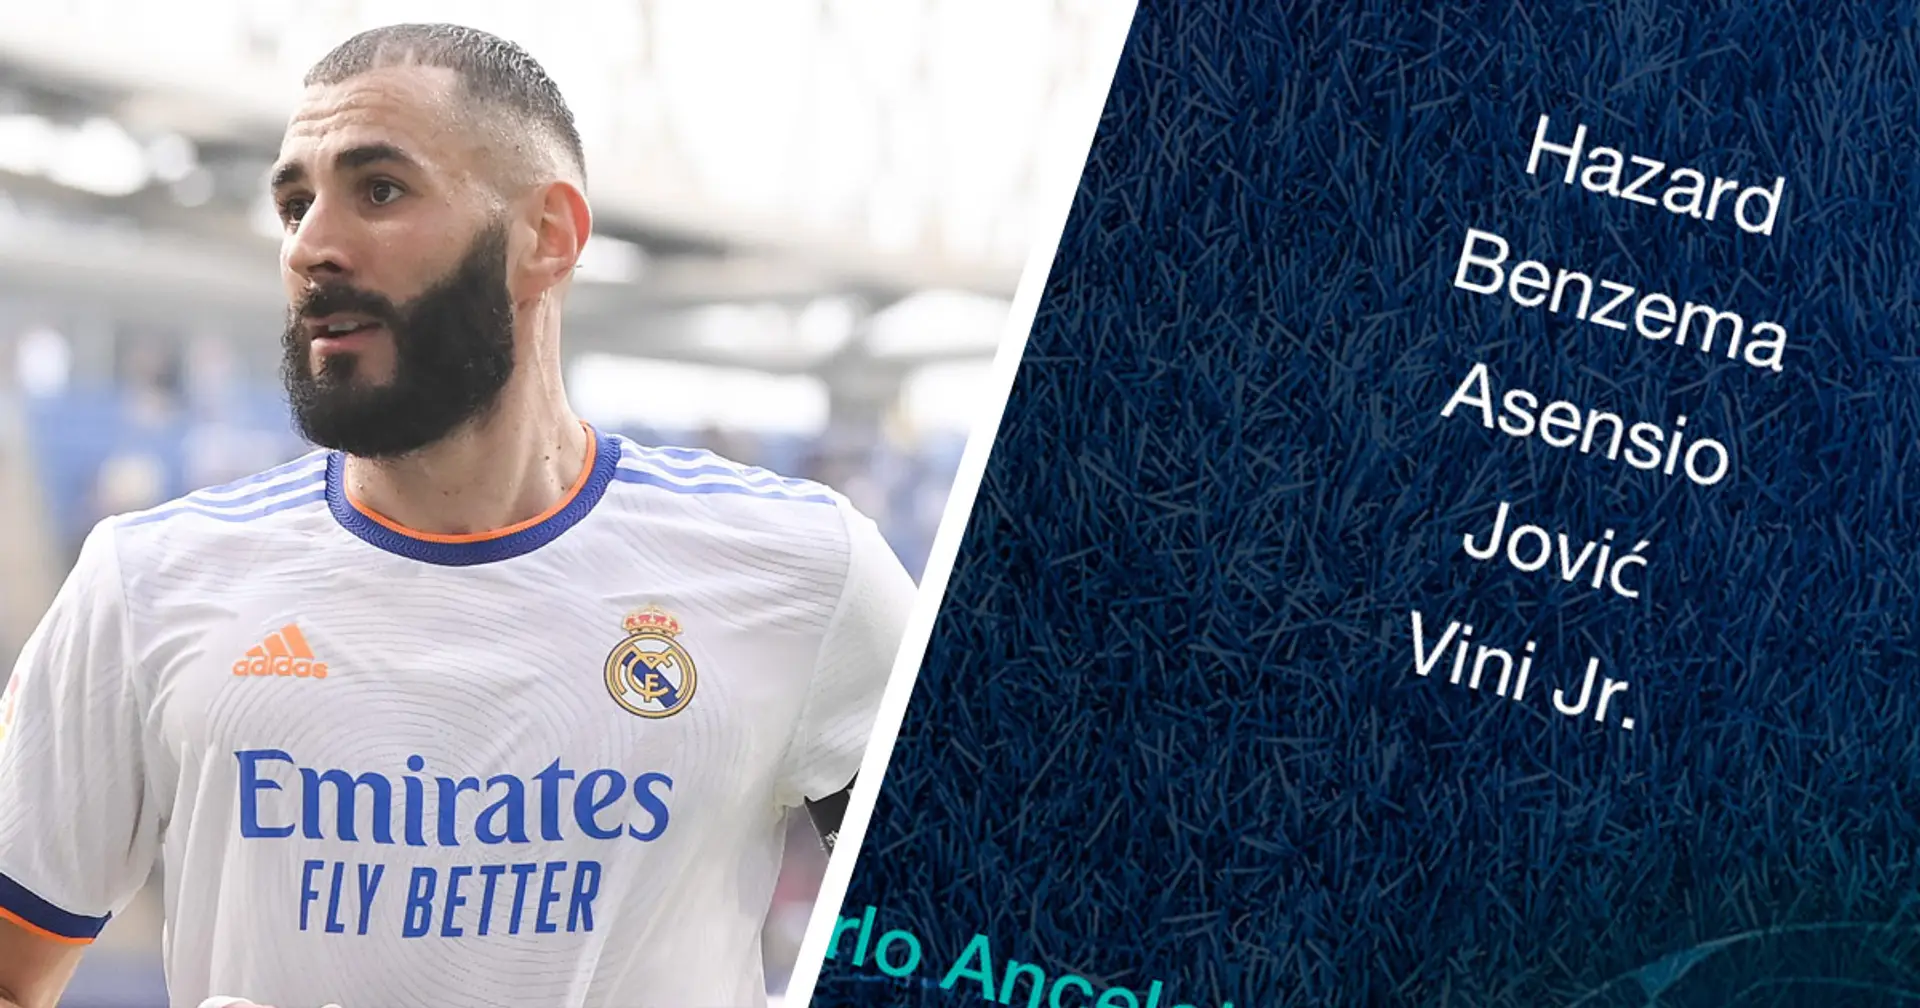 Benzema back as Real Madrid confirm 23-man squad for Shakhtar Donetsk match